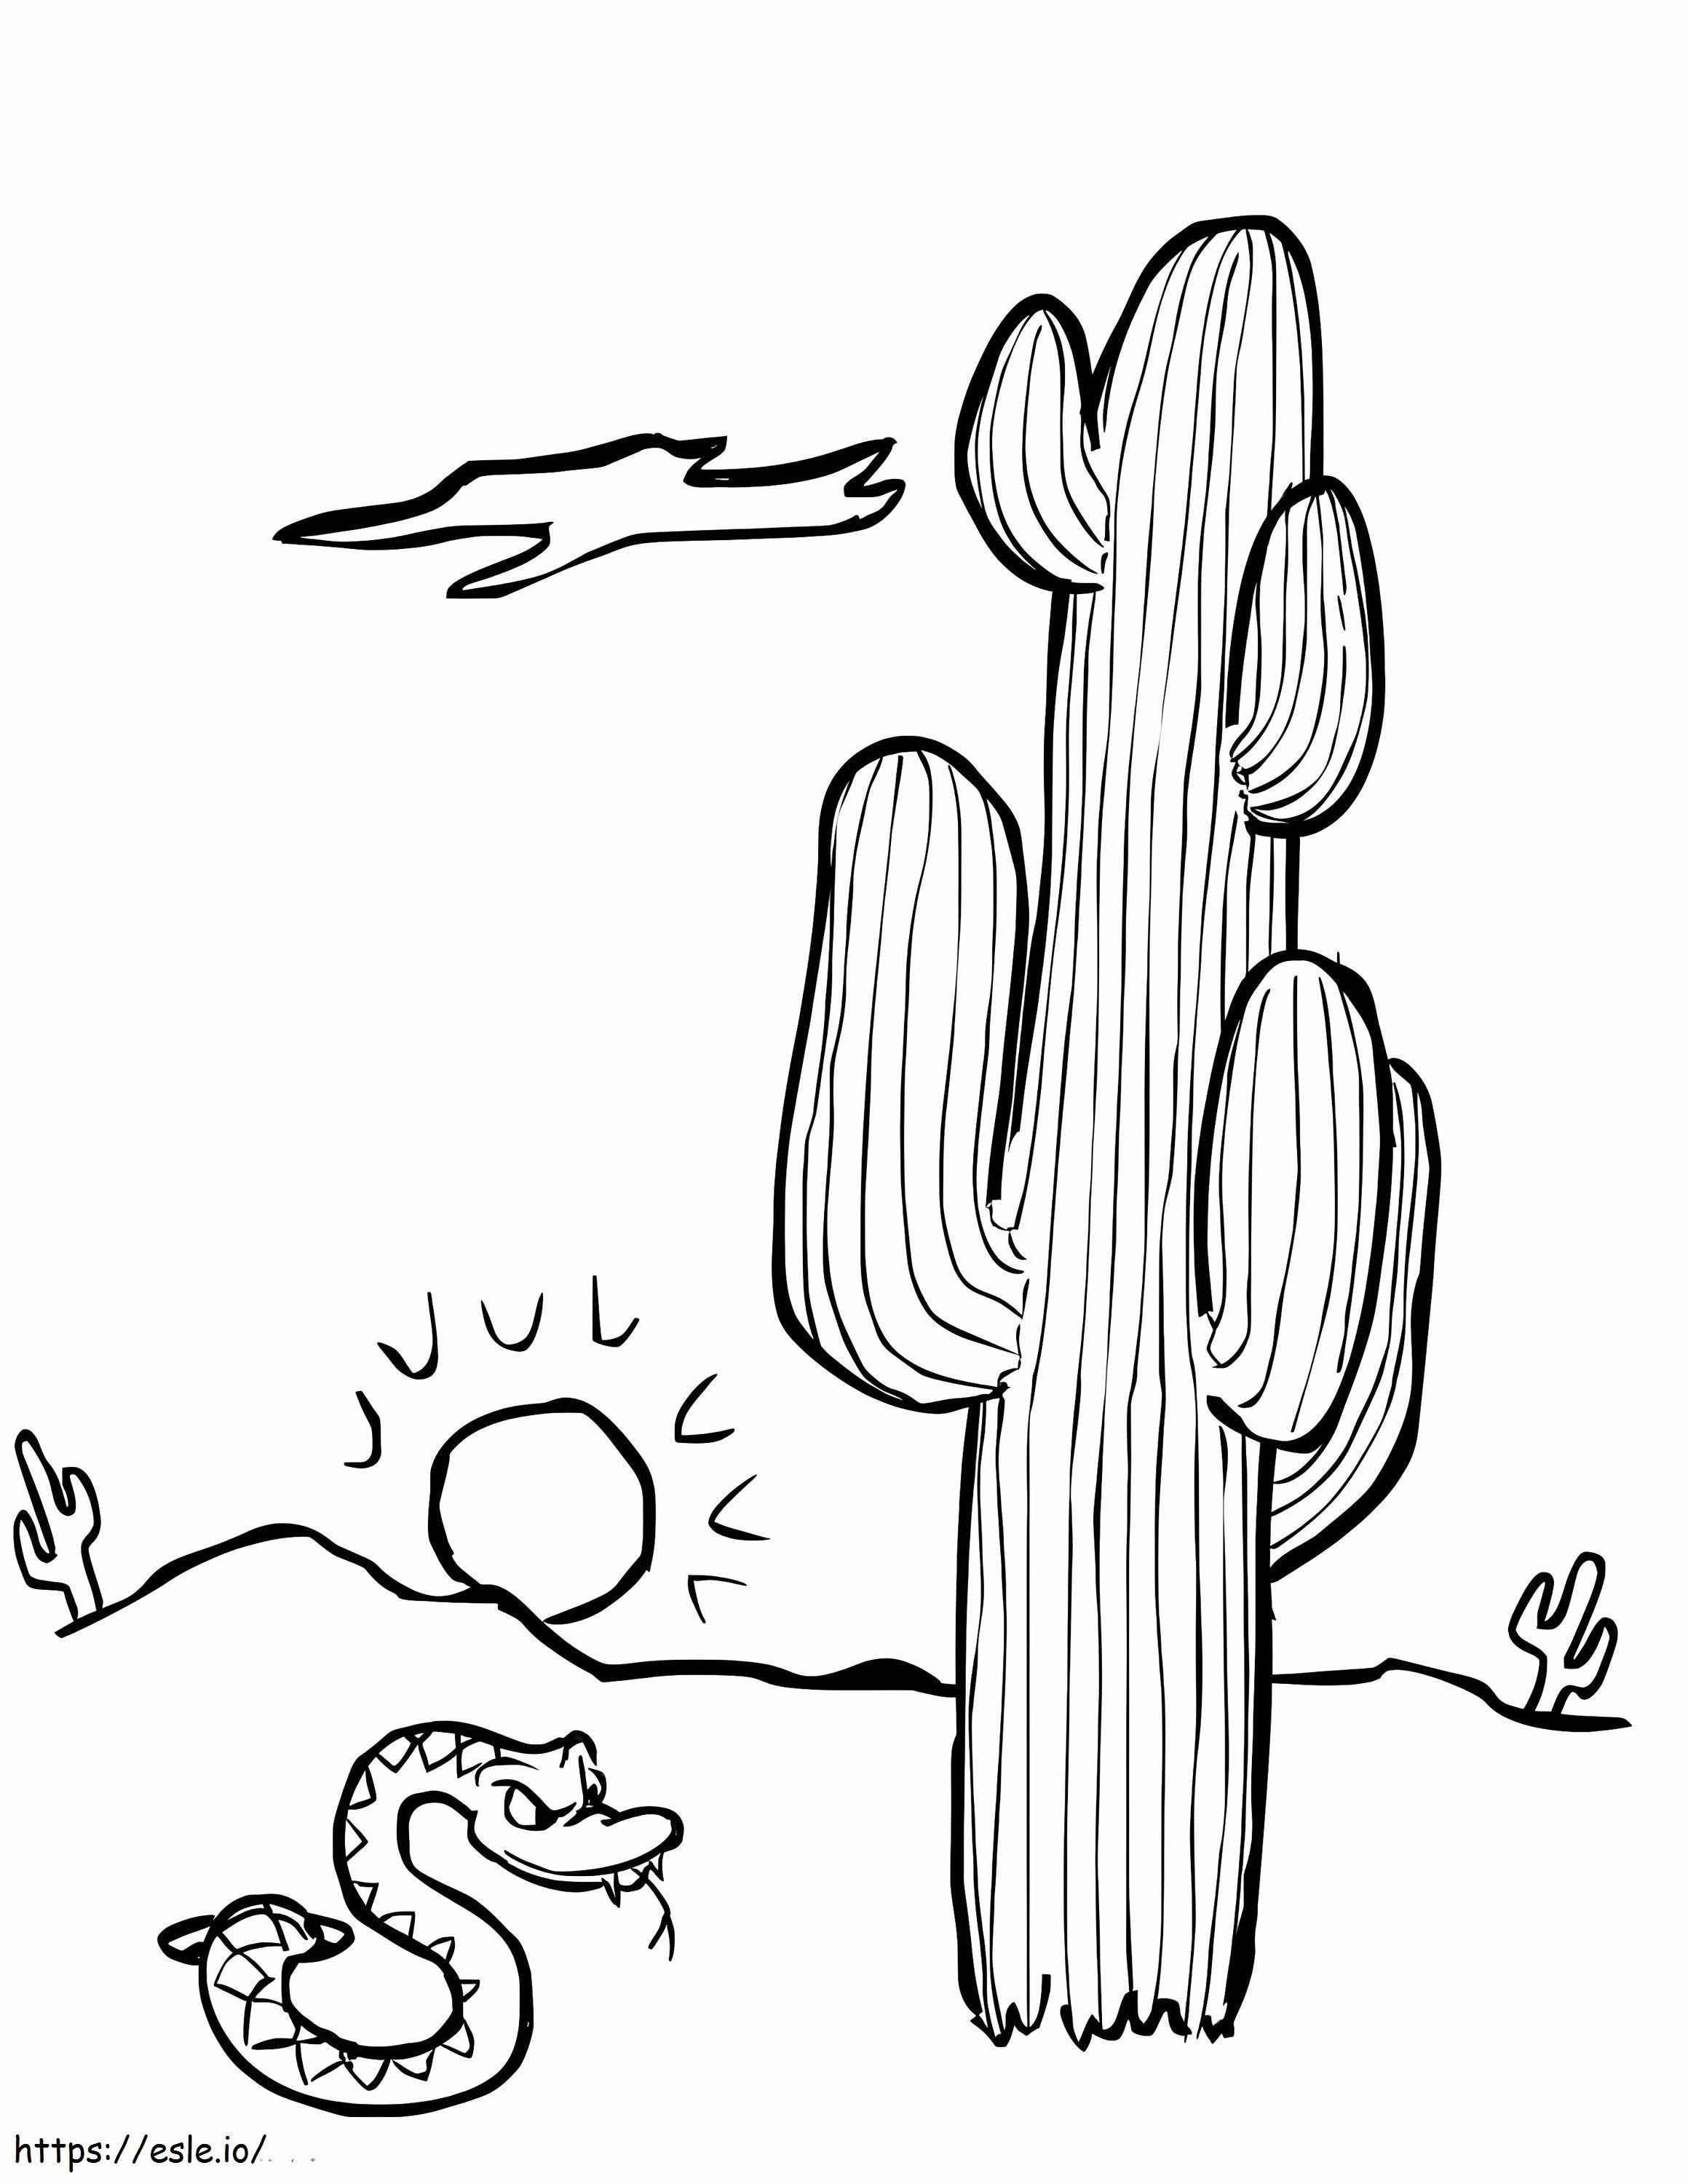 Desert Snake coloring page